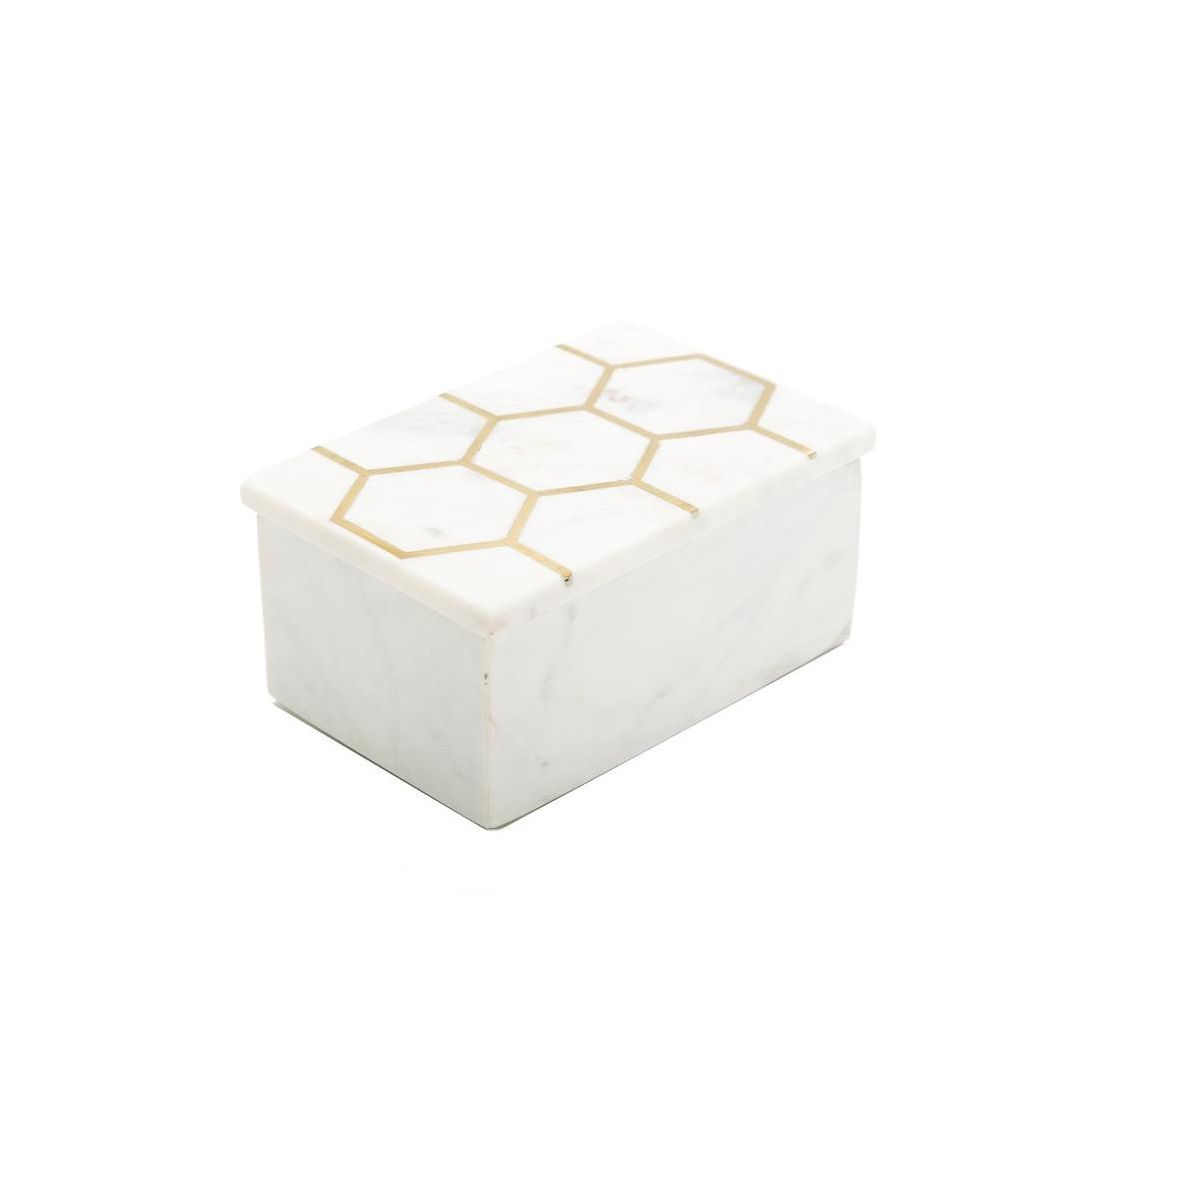 Classic Touch White Marble Decorative Box W/ Gold Hexagon Design On cover | Target